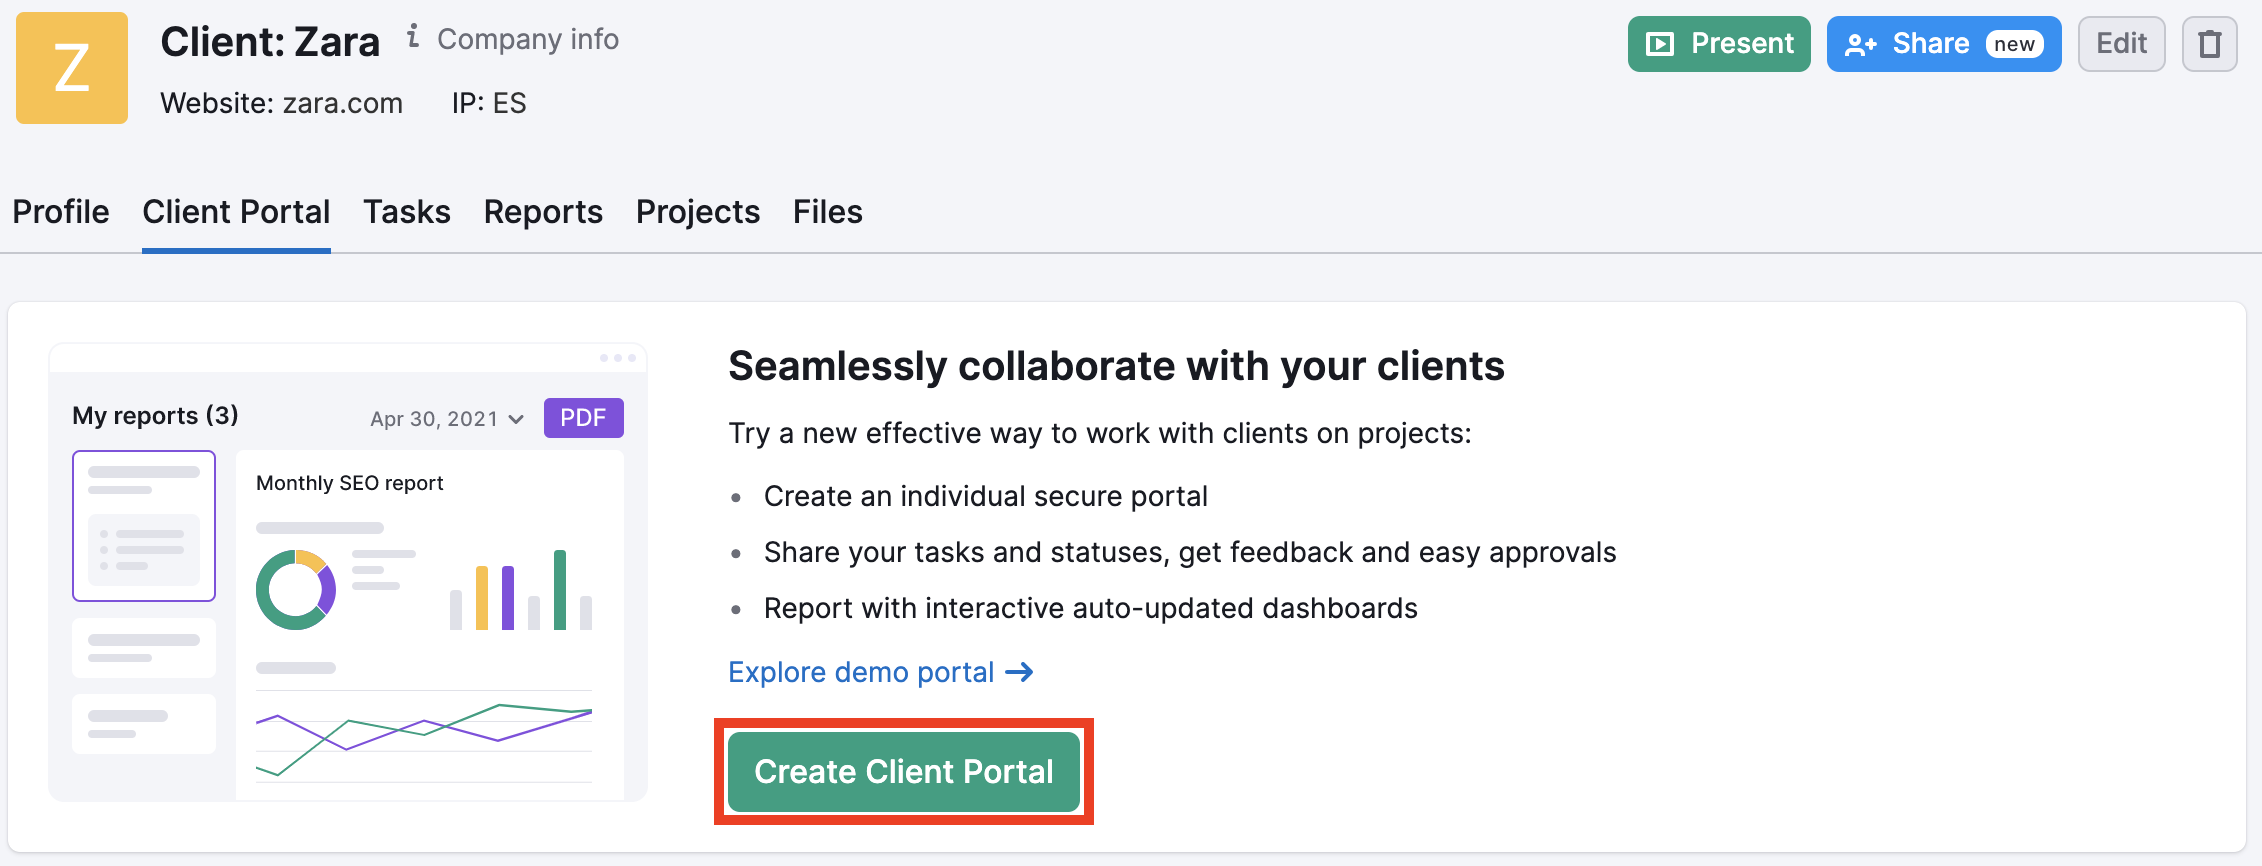 Go to the Client portal tab and click the button to create a portal. 